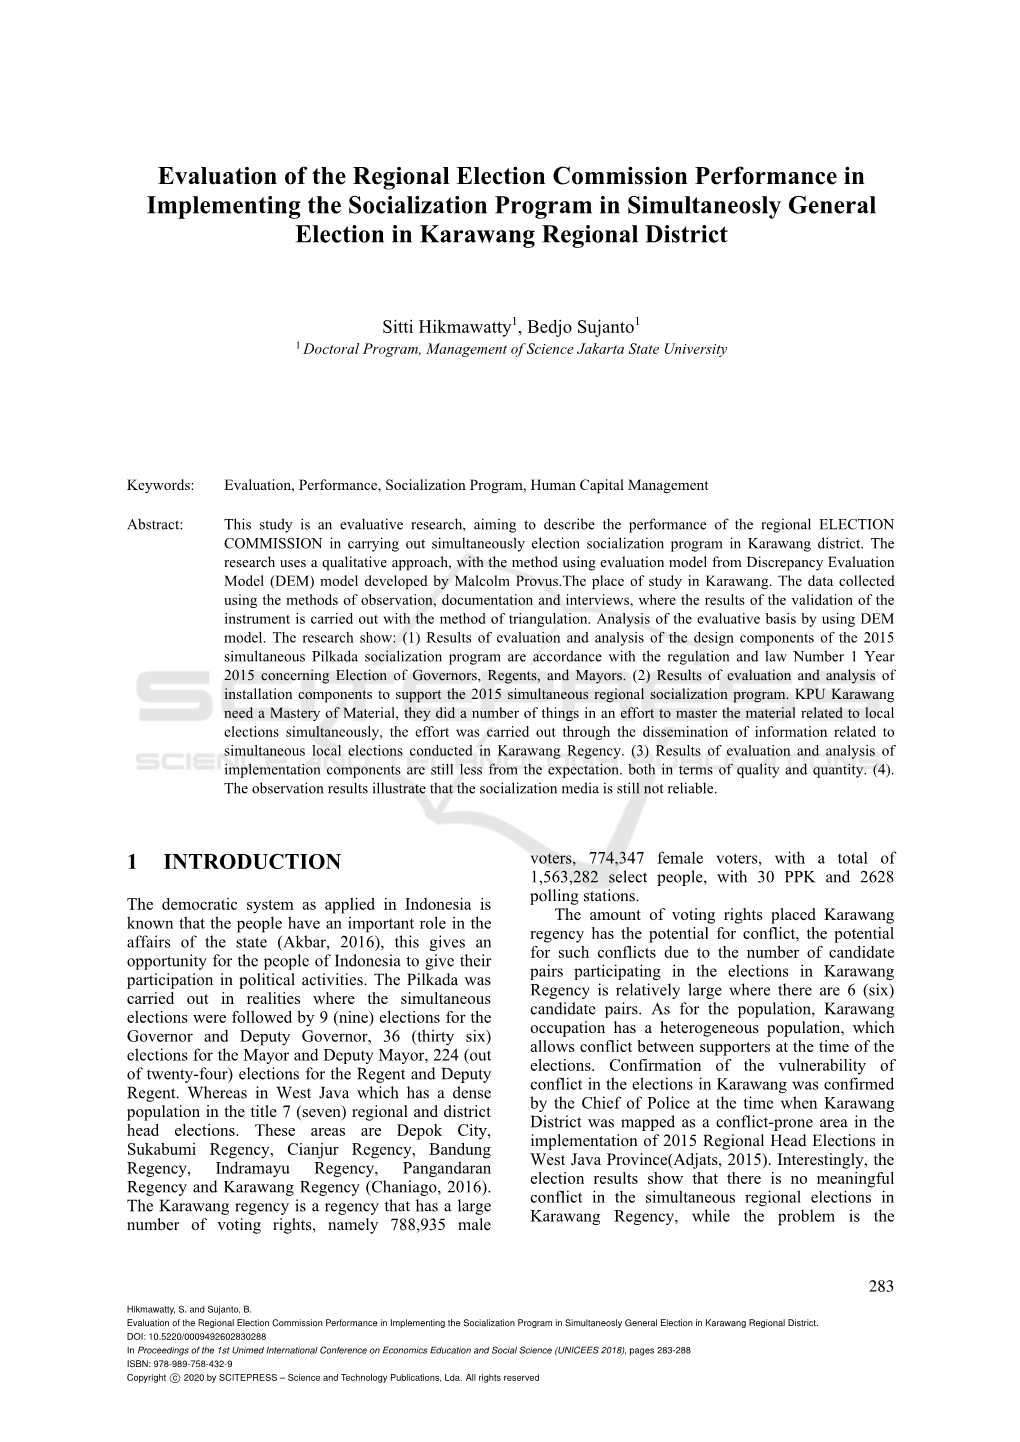 Evaluation of the Regional Election Commission Performance in Implementing the Socialization Program in Simultaneosly General Election in Karawang Regional District